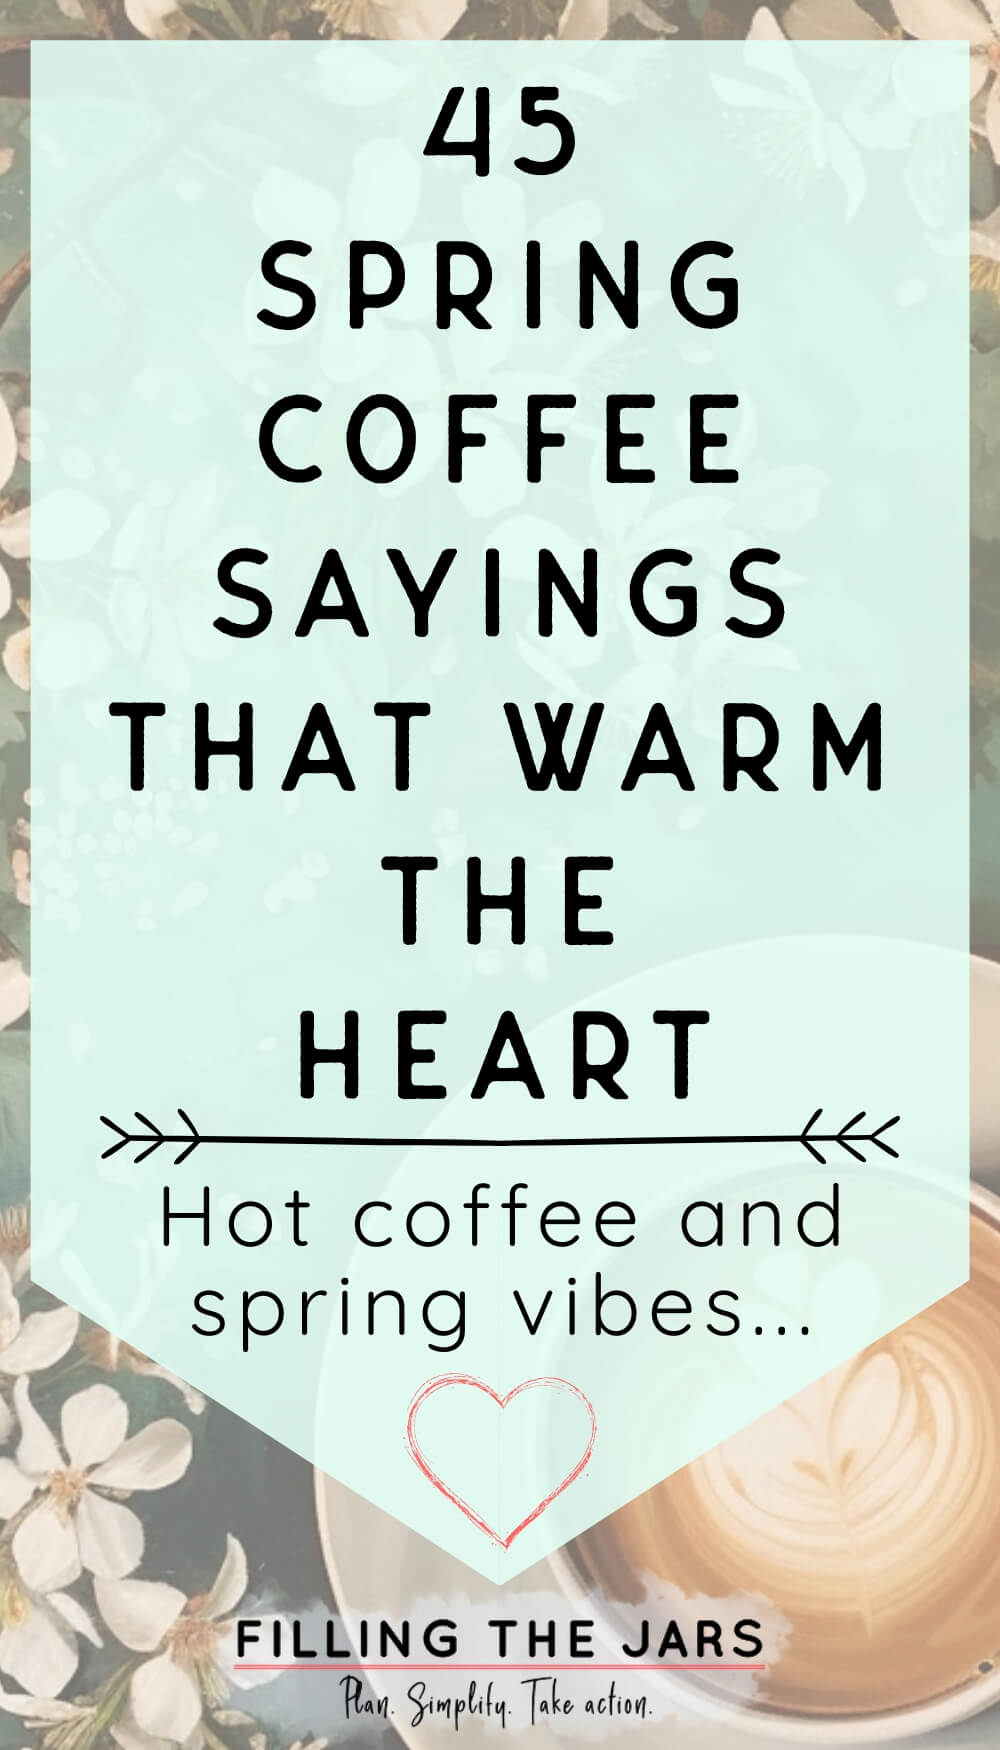 Pinterest image with text '45 spring coffee sayings that warm the heart' on turquoise background over faded image of coffee cup on table surrounded by spring blooms.